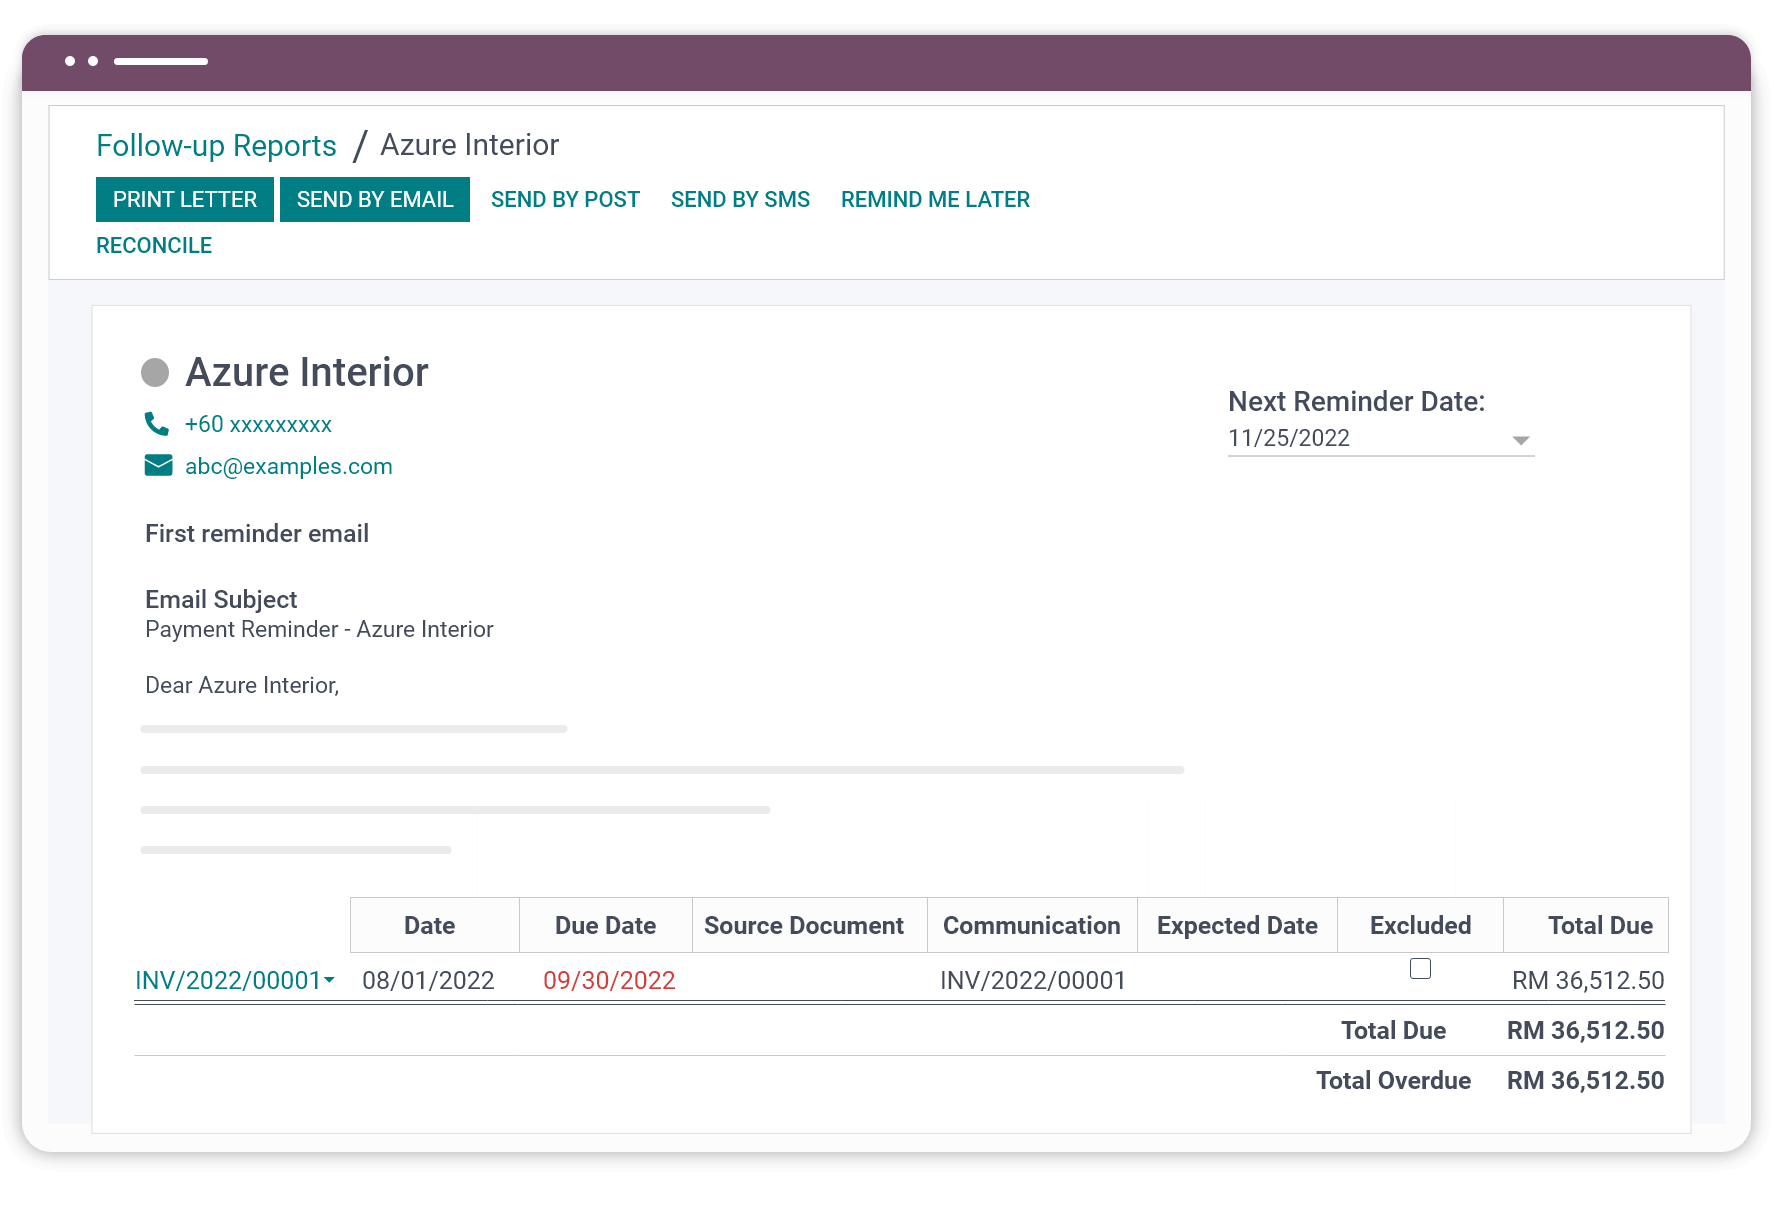 Follow-up reports in Odoo Accounting app ease the payment collection process.